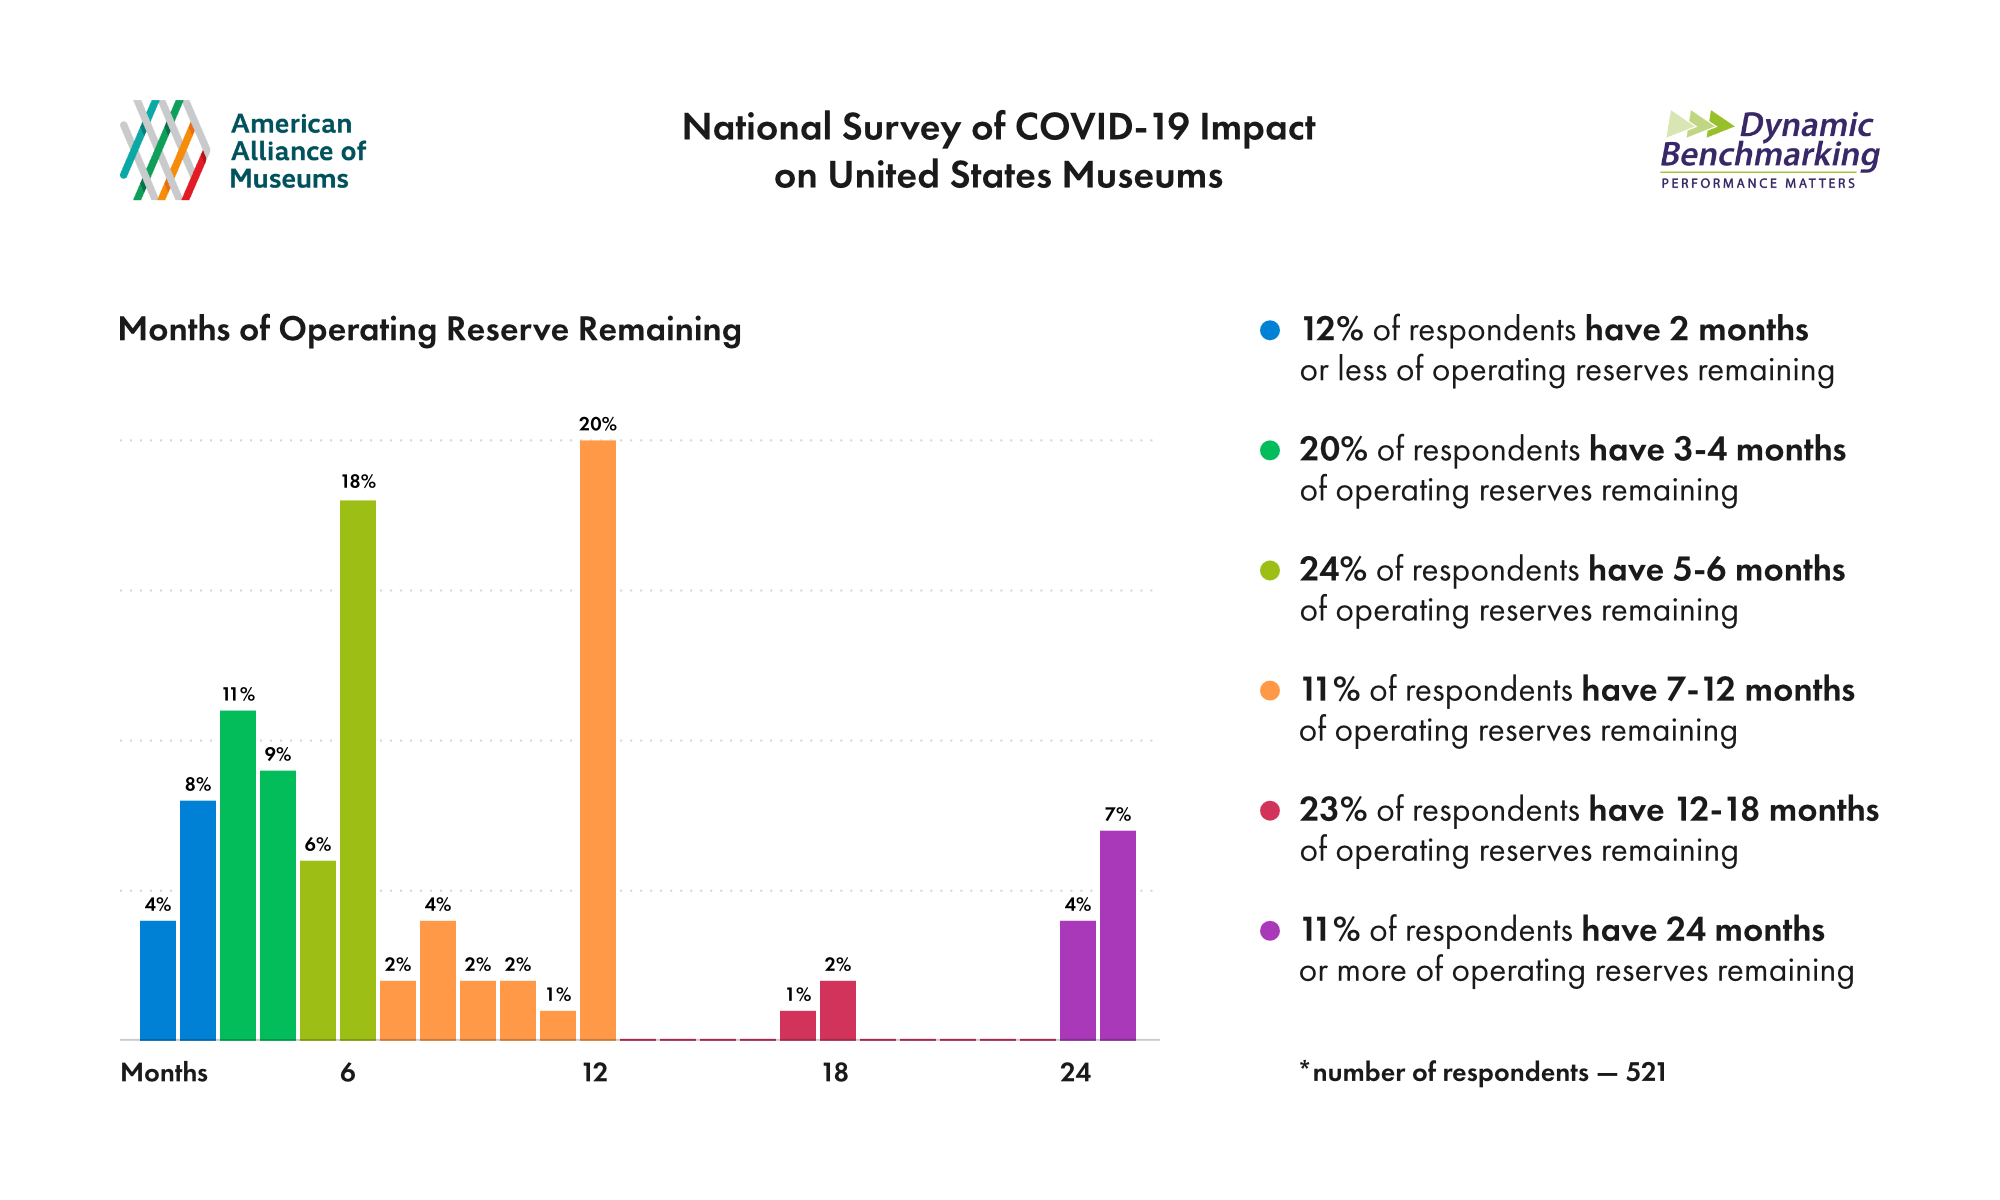 Month of Operating Reserve Remaining per National Survey of COVID-19 Impact on United States Museums